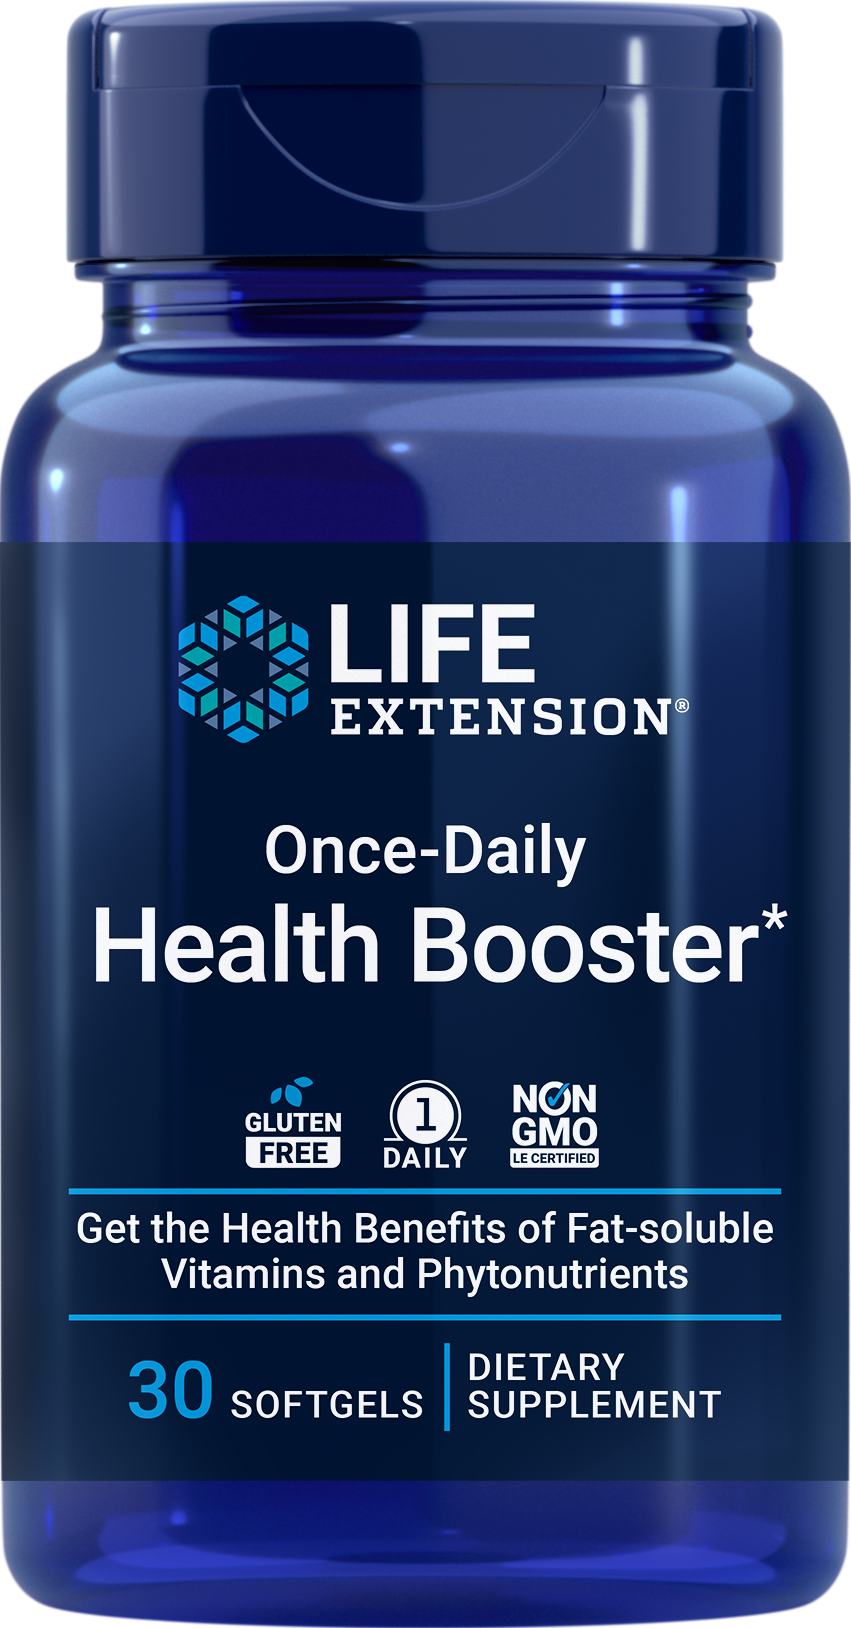 Once-Daily Health Booster, 30 gels